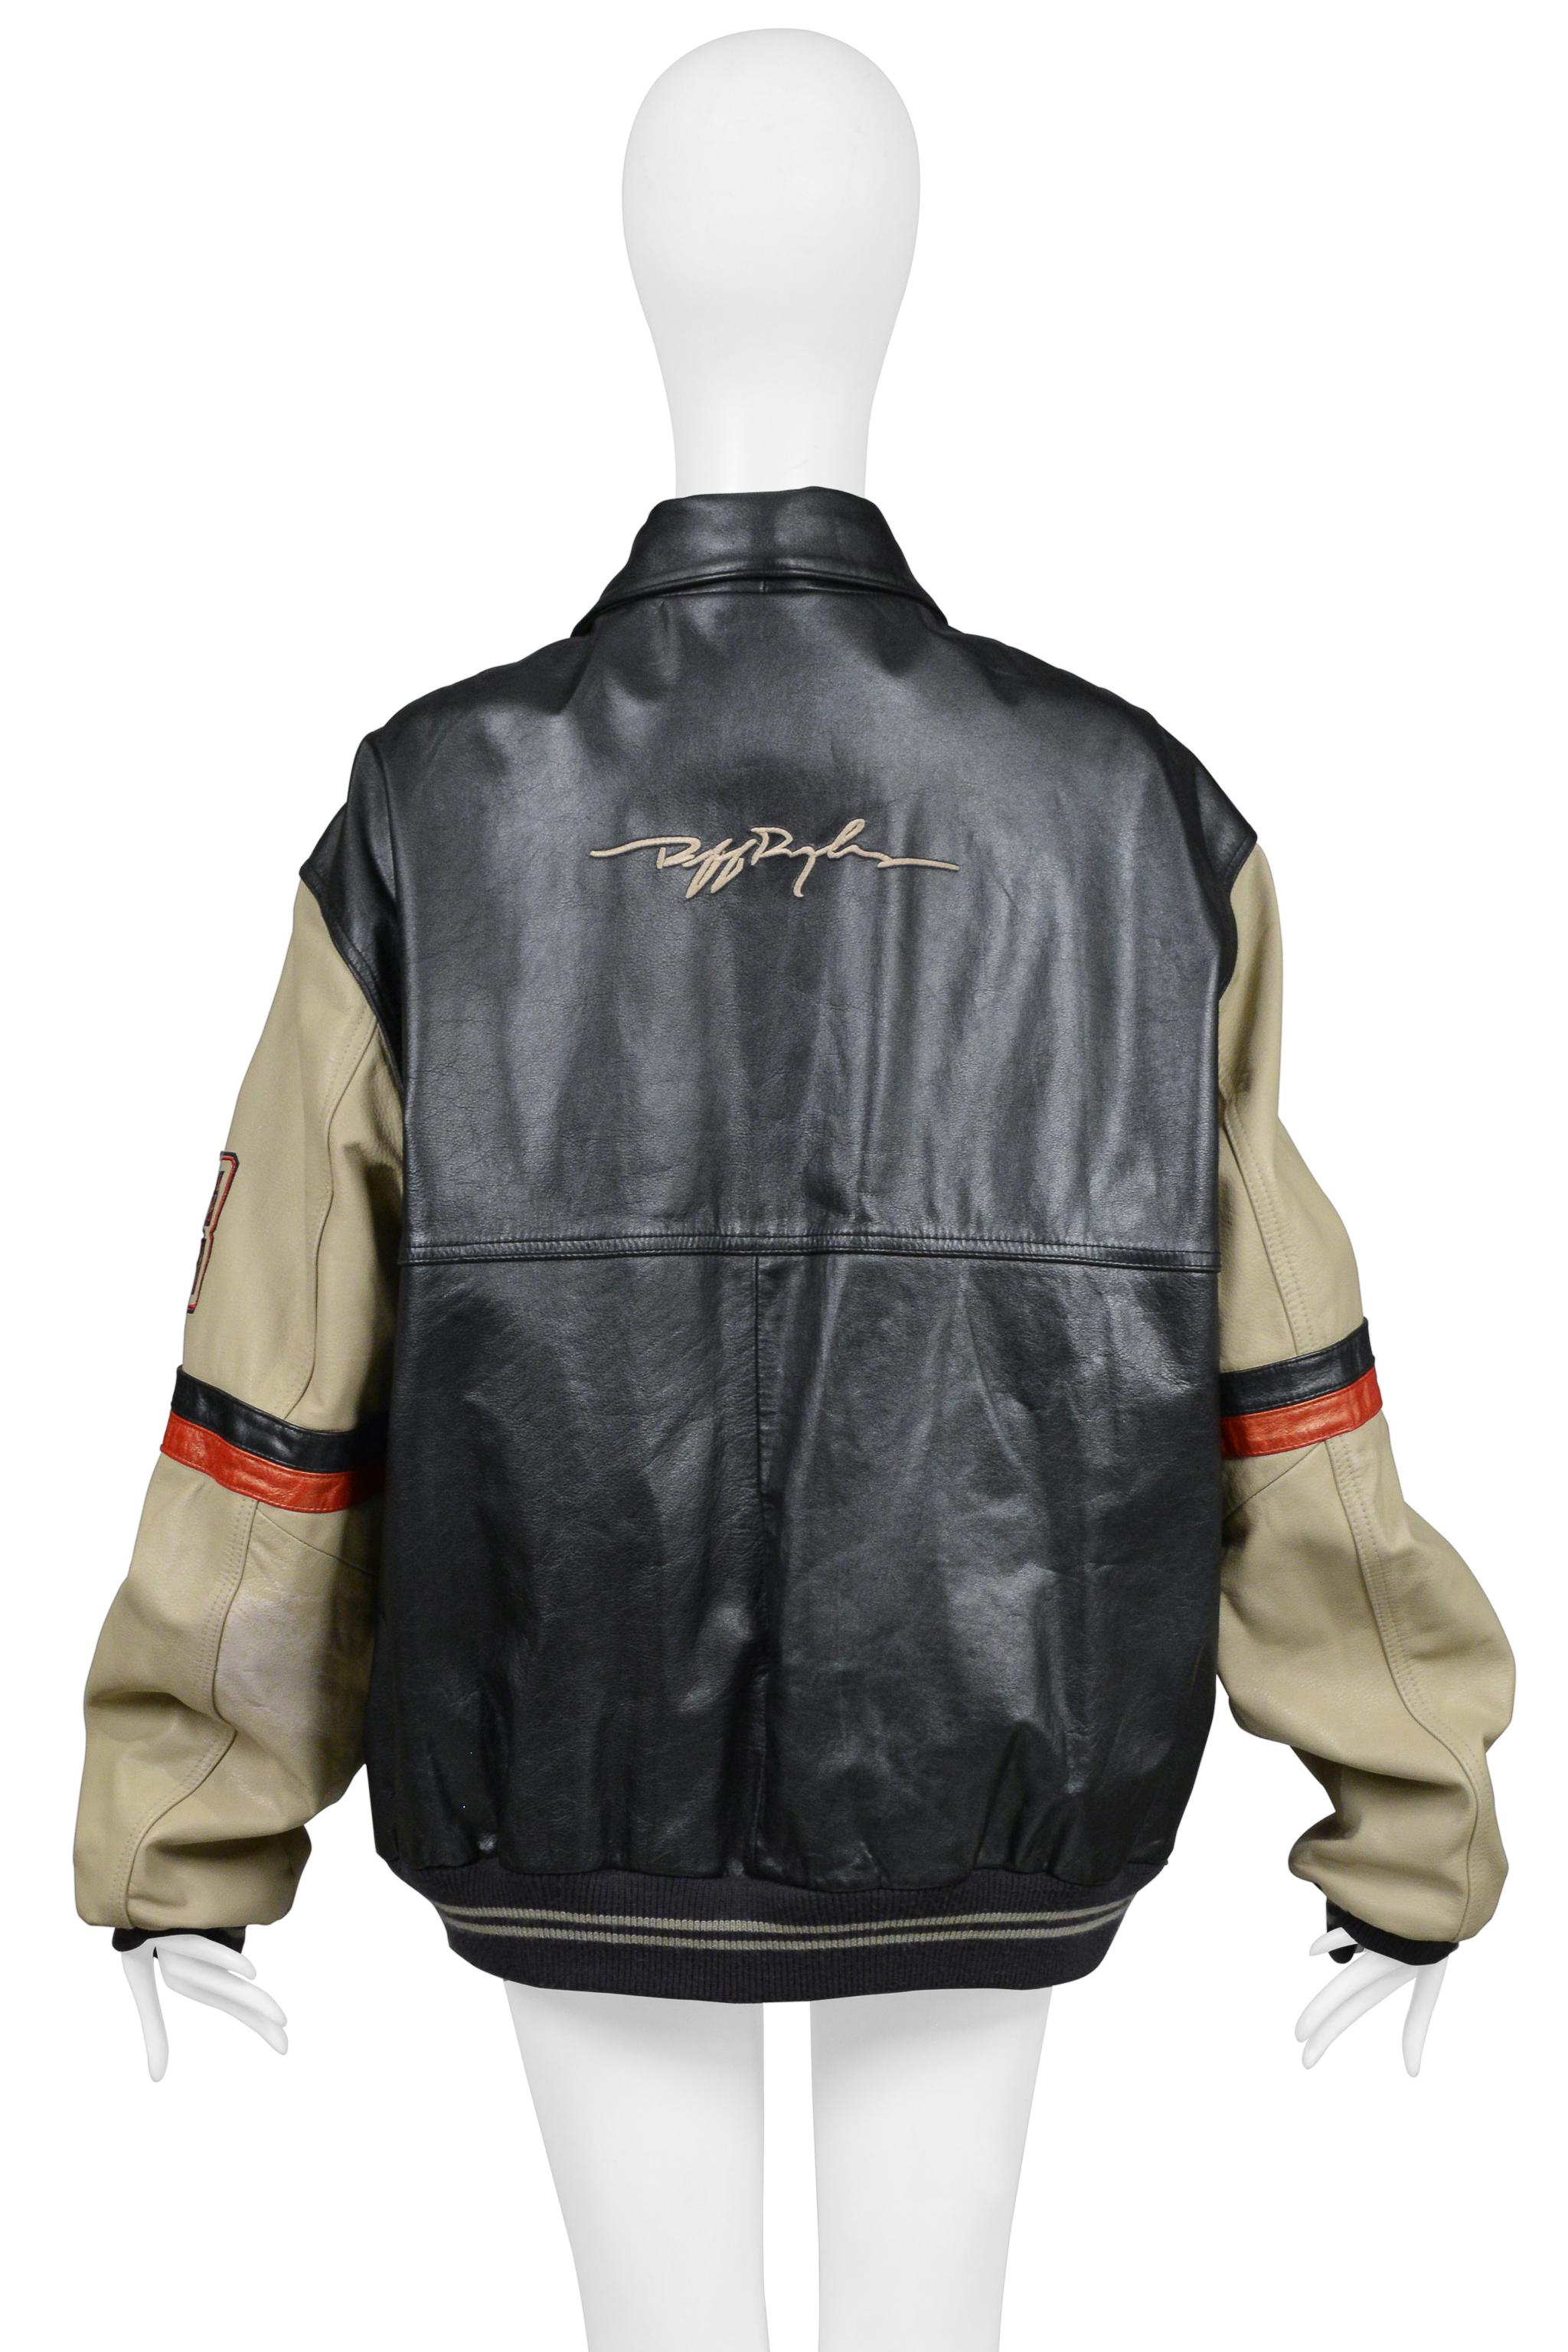 Ruff Ryders Unisex Leather Bomber Jacket For Sale 6